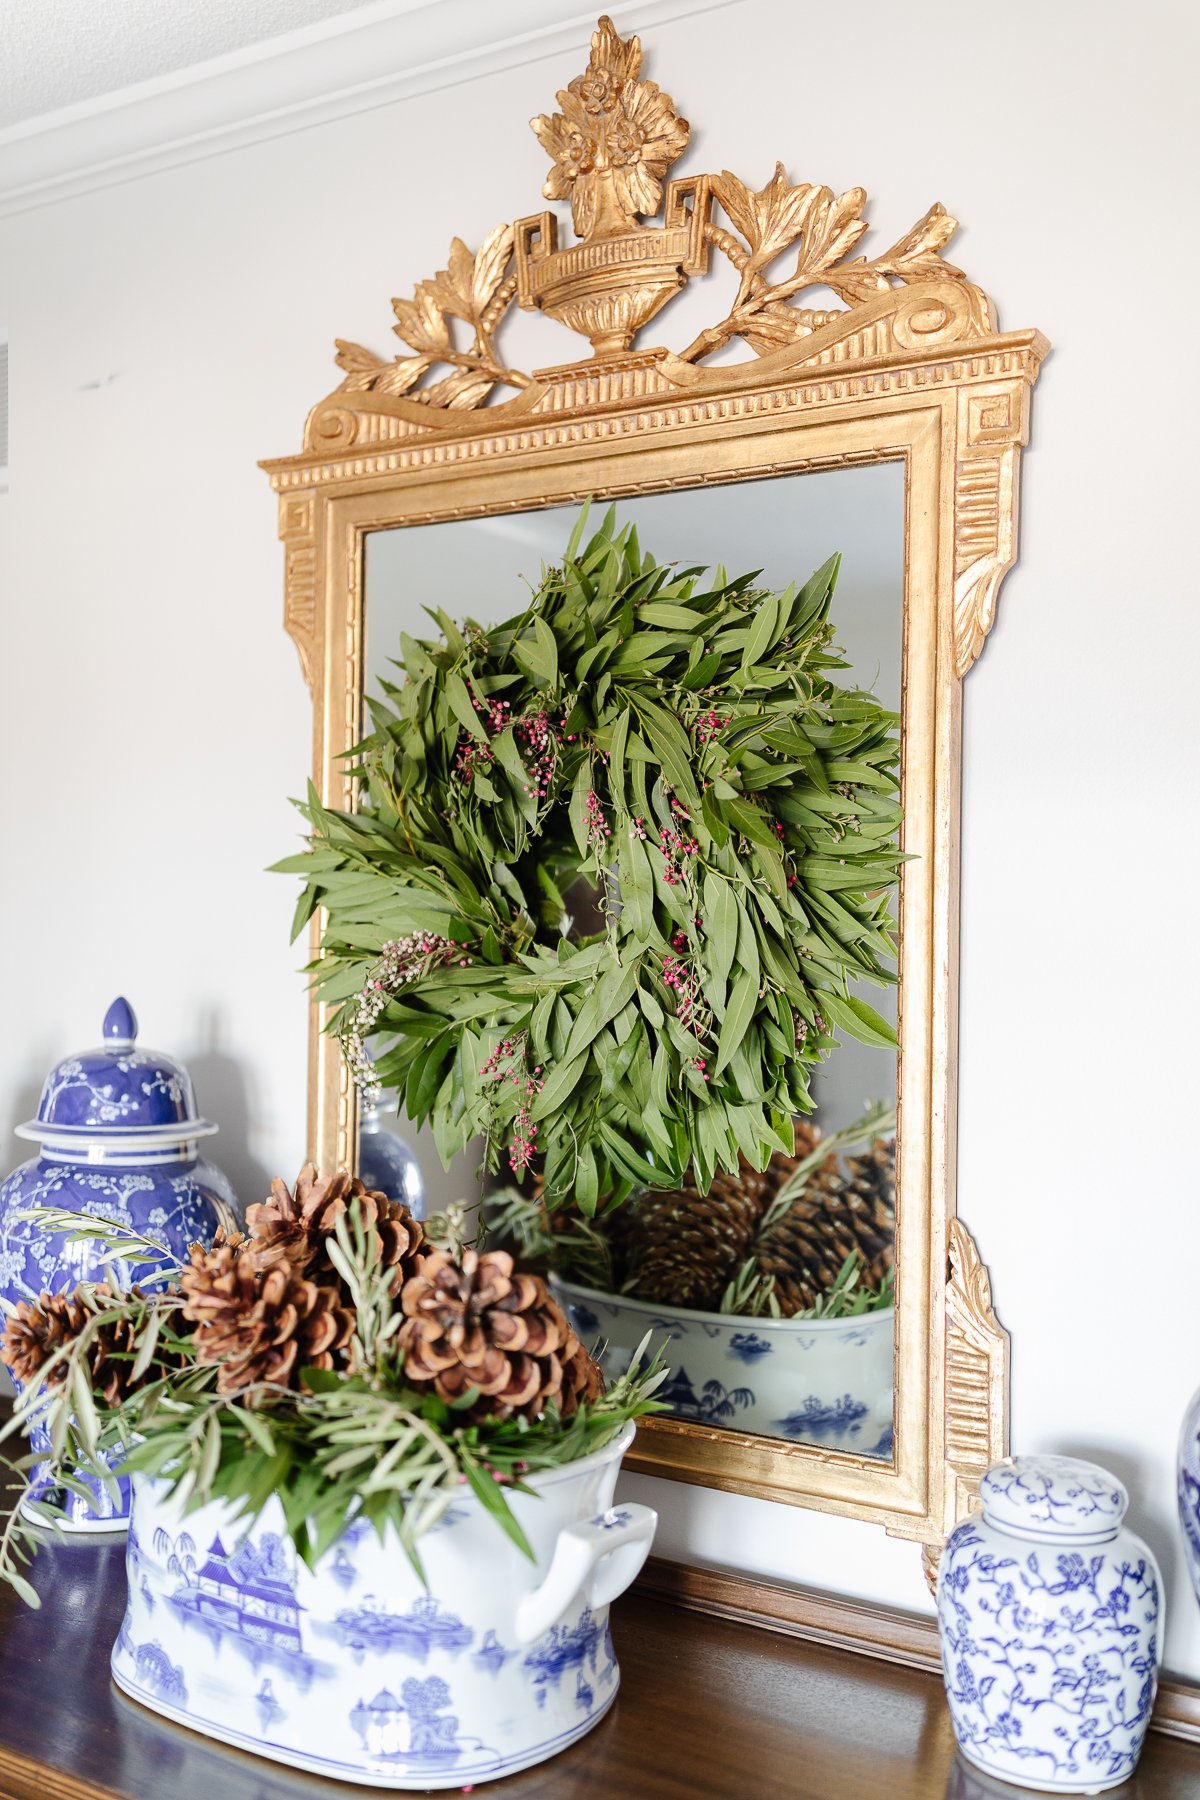 A mirror with a wreath on it.